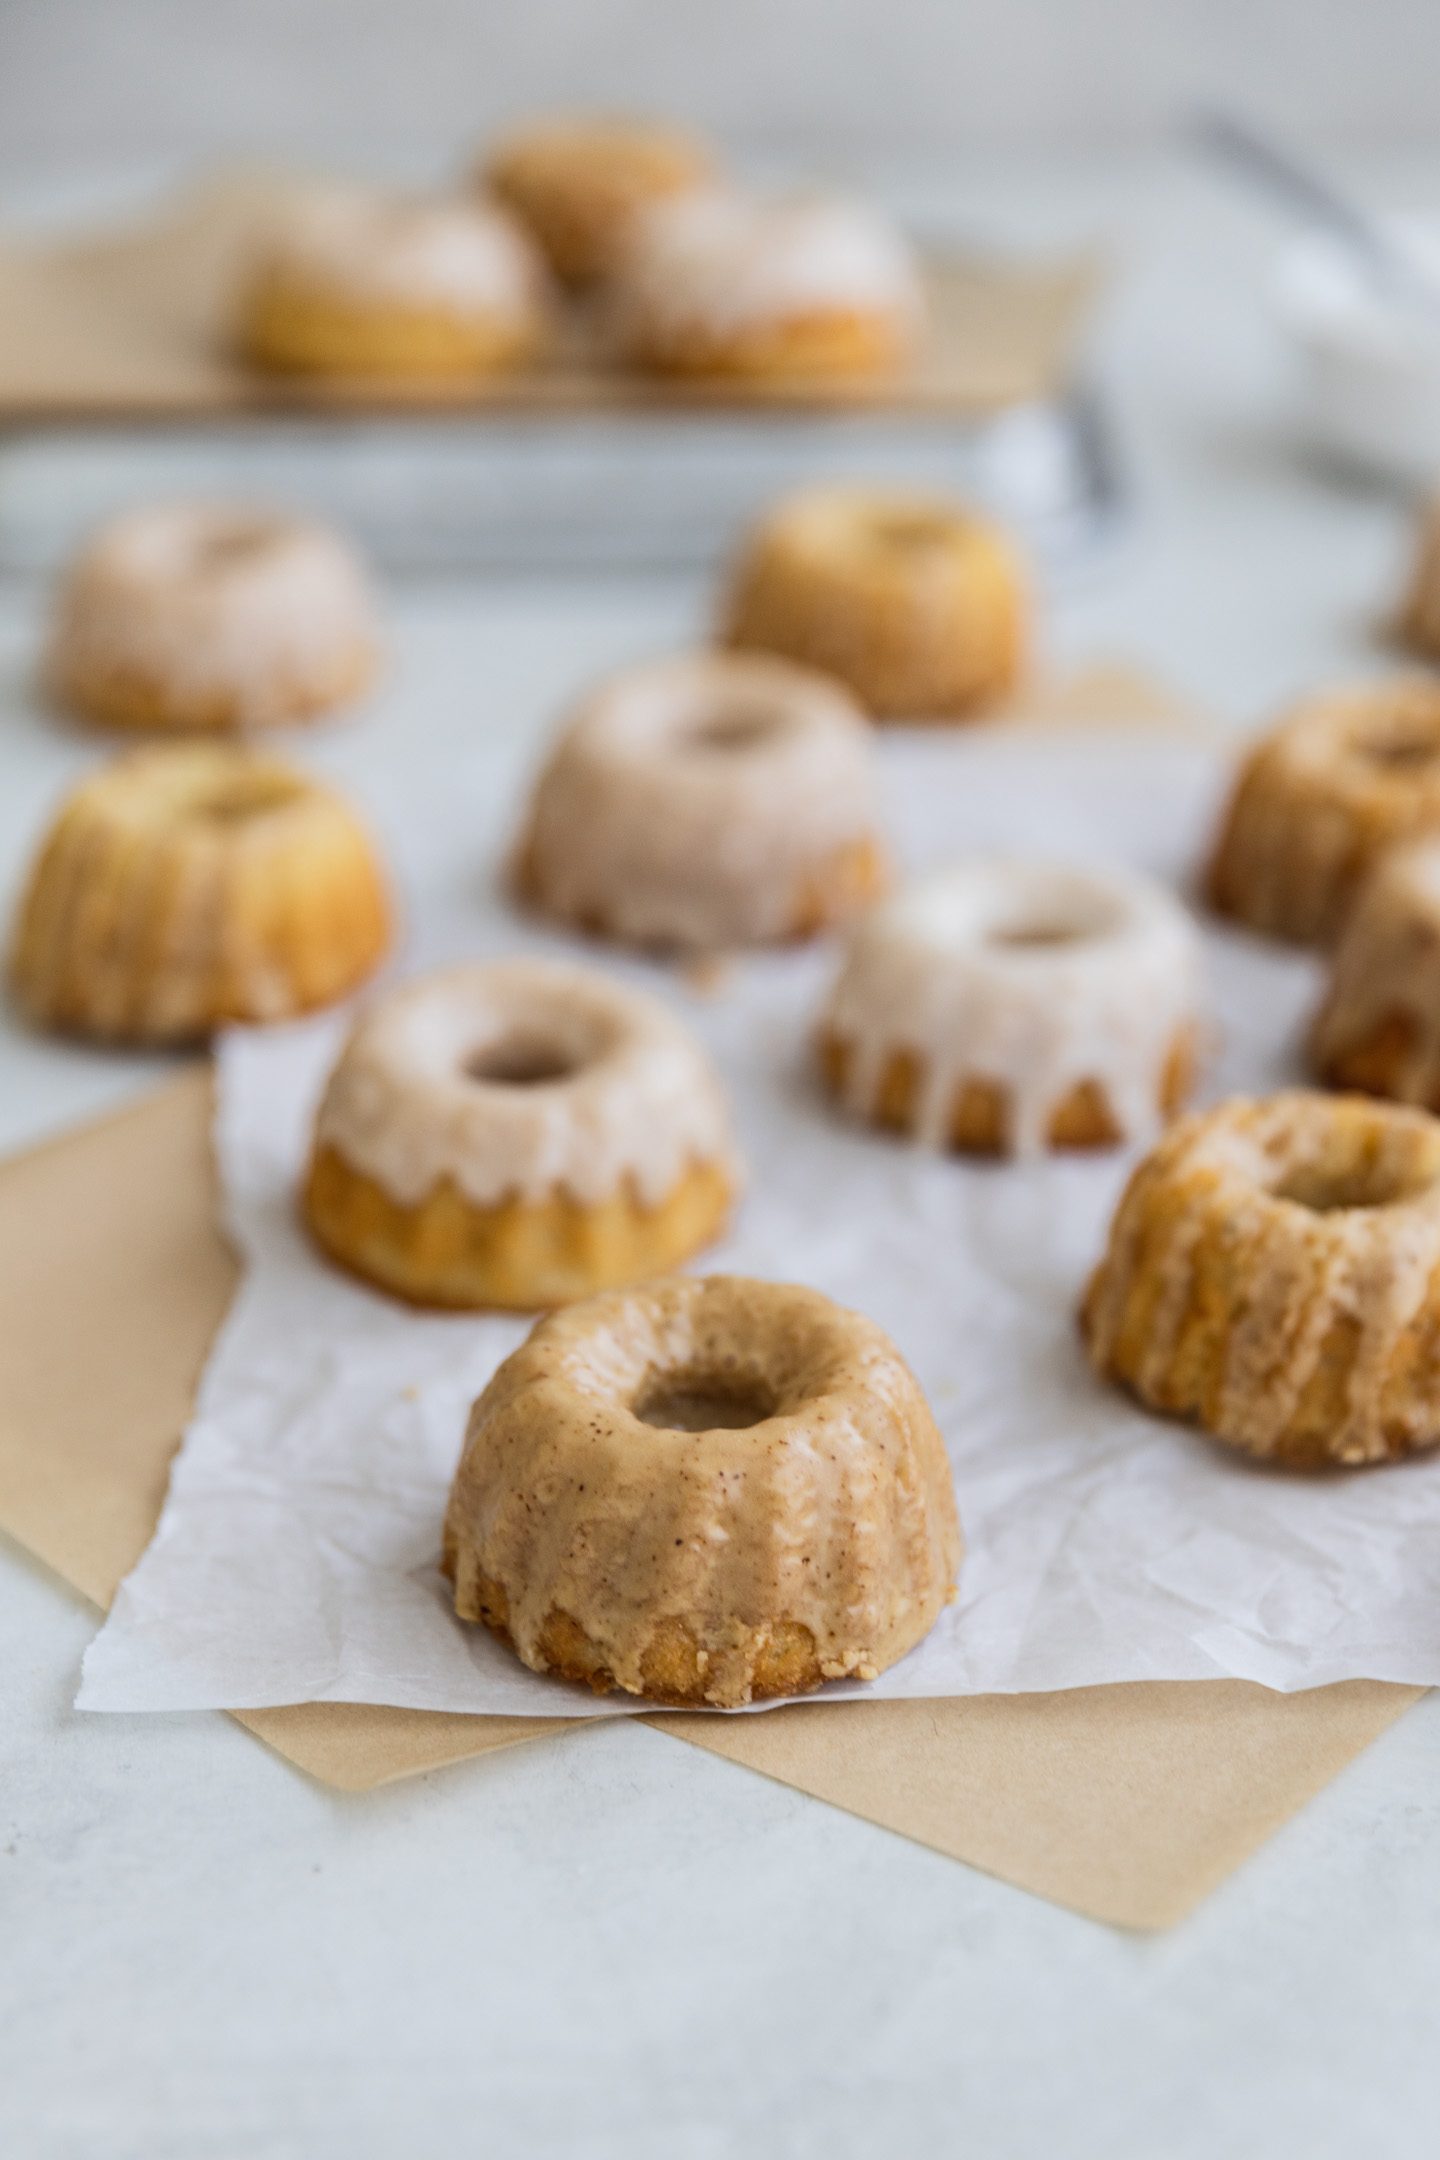 Mini iced bundt cakes on brown and white parchment paper.